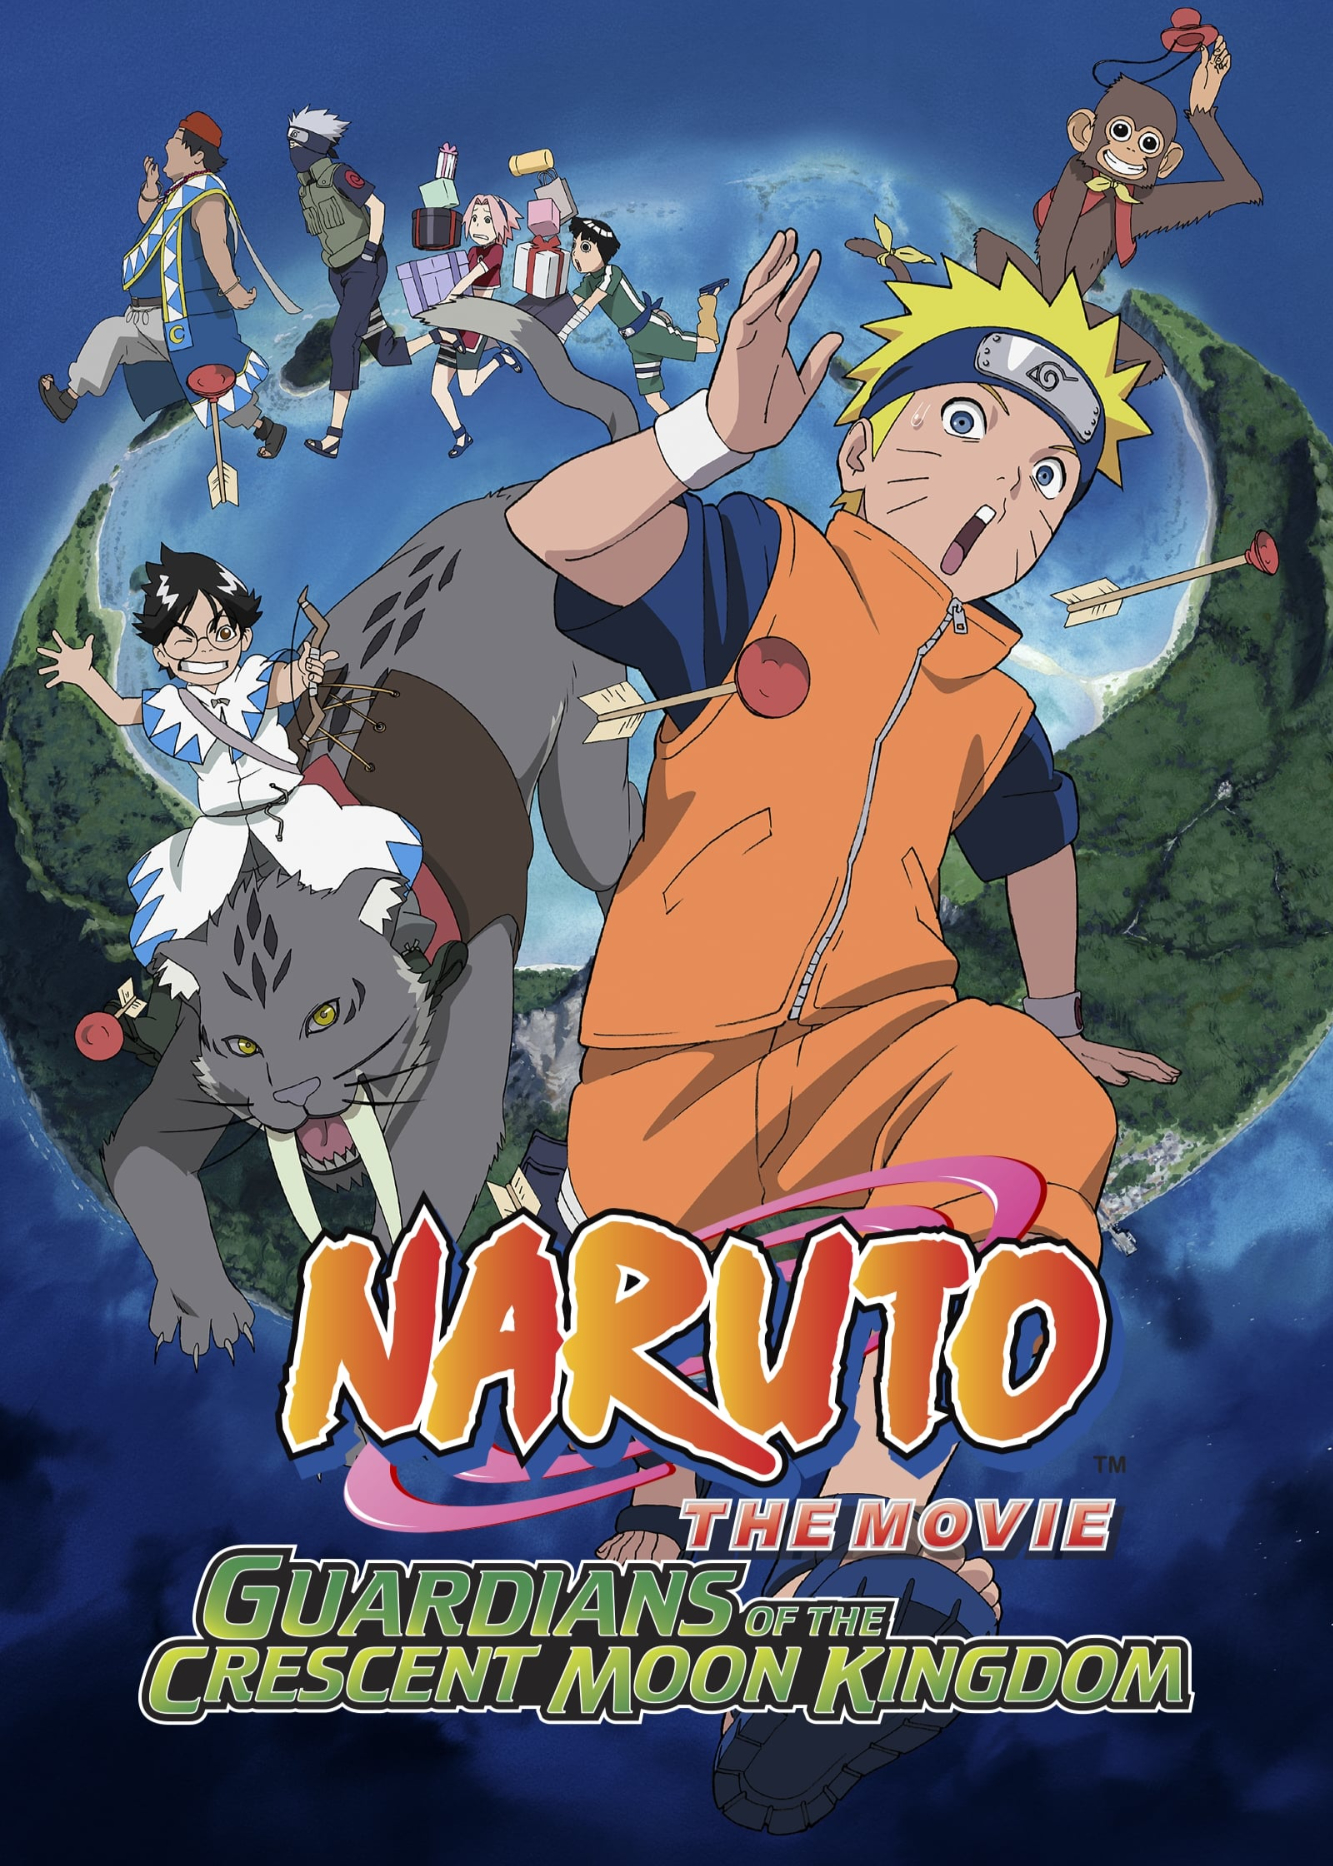 Poster Phim Naruto the Movie 3: Guardians of the Crescent Moon Kingdom (Naruto the Movie 3: Guardians of the Crescent Moon Kingdom)